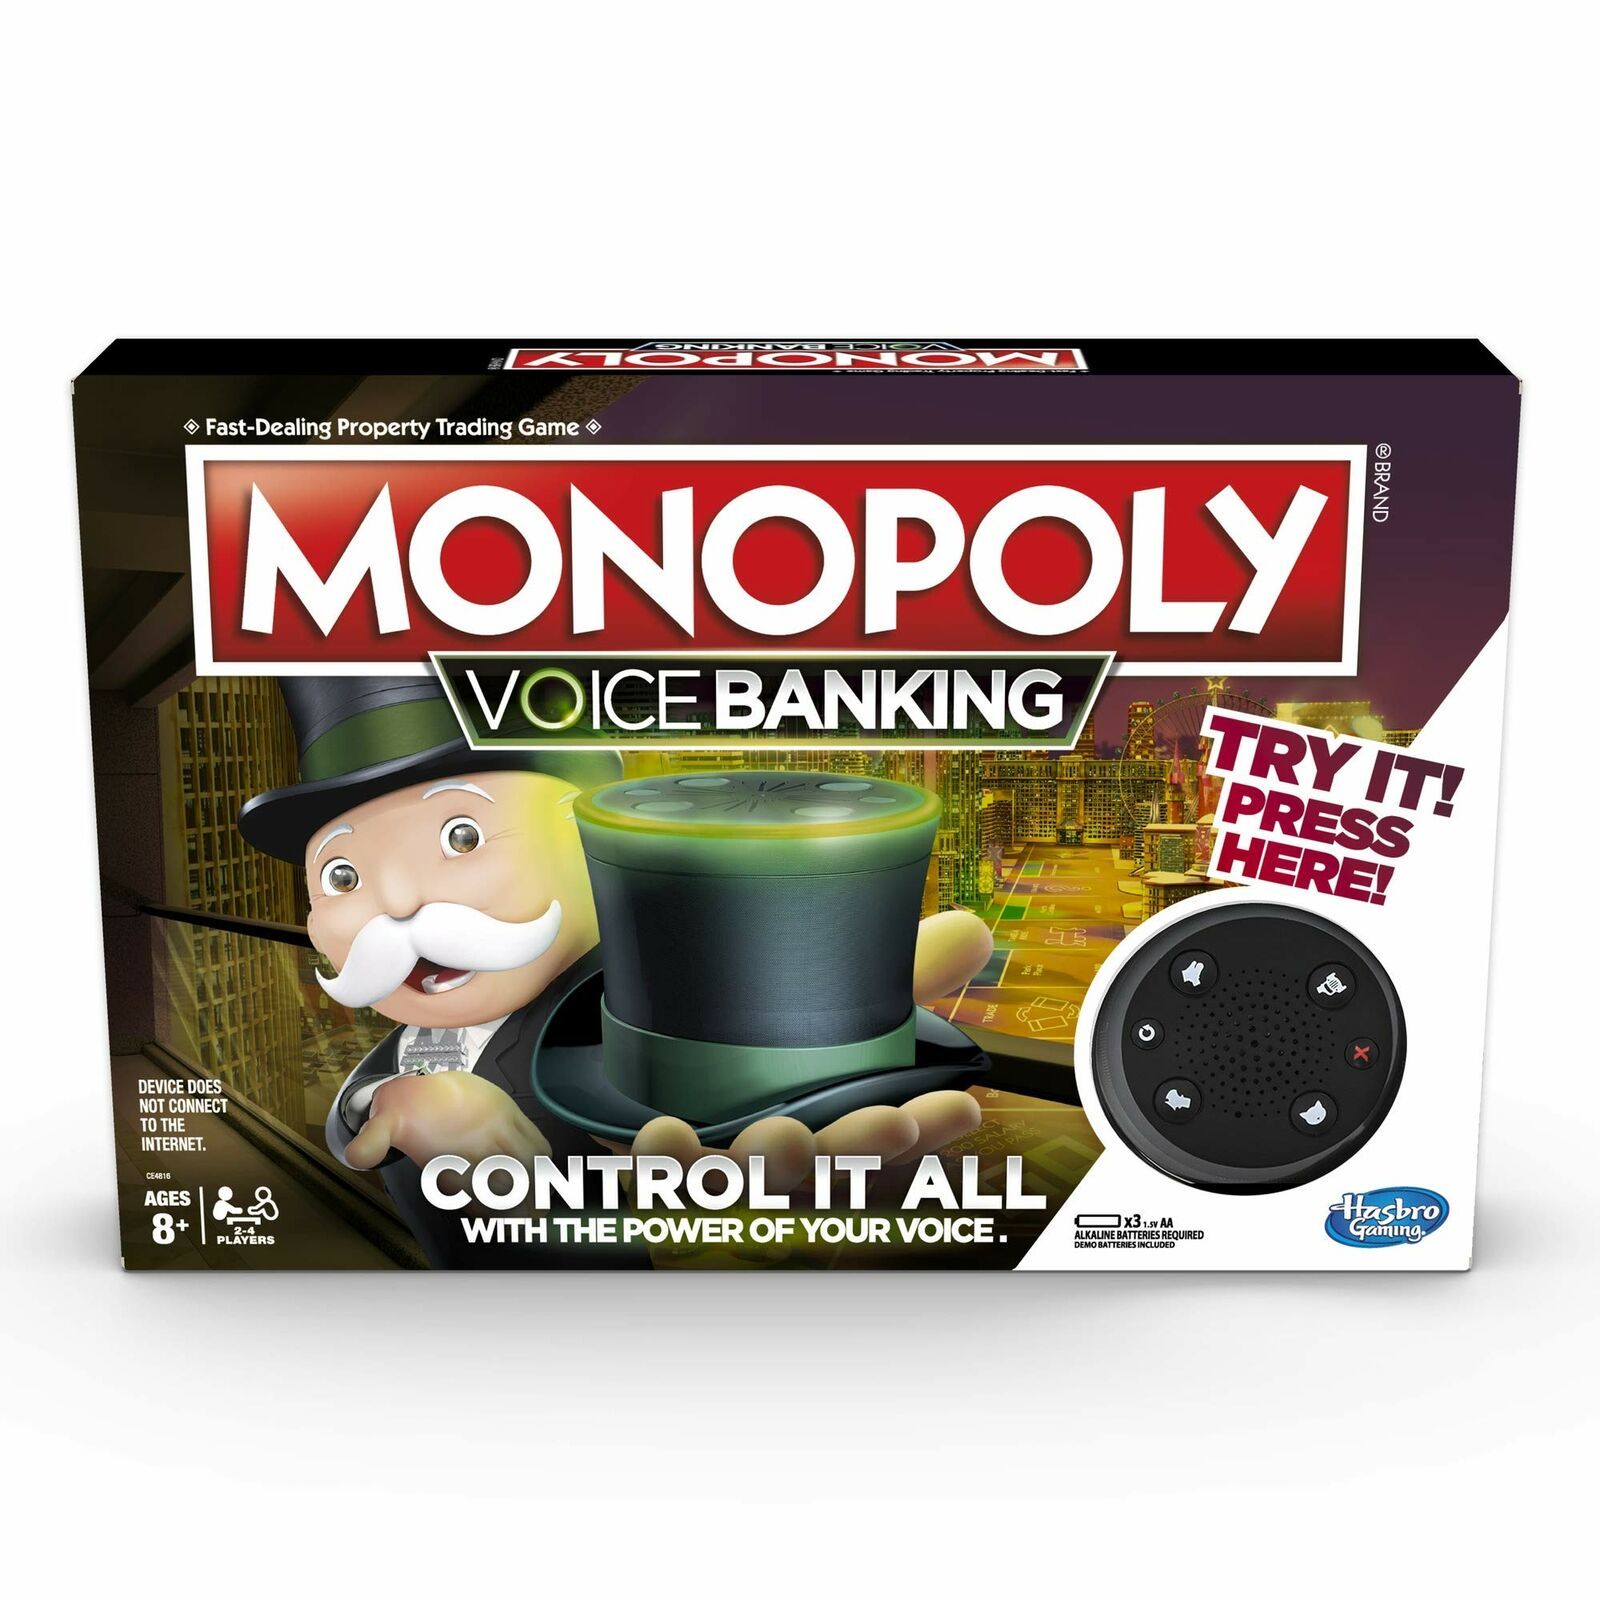 Hasbro - Monopoly voice banking board game the fast dealing property trading game ages...